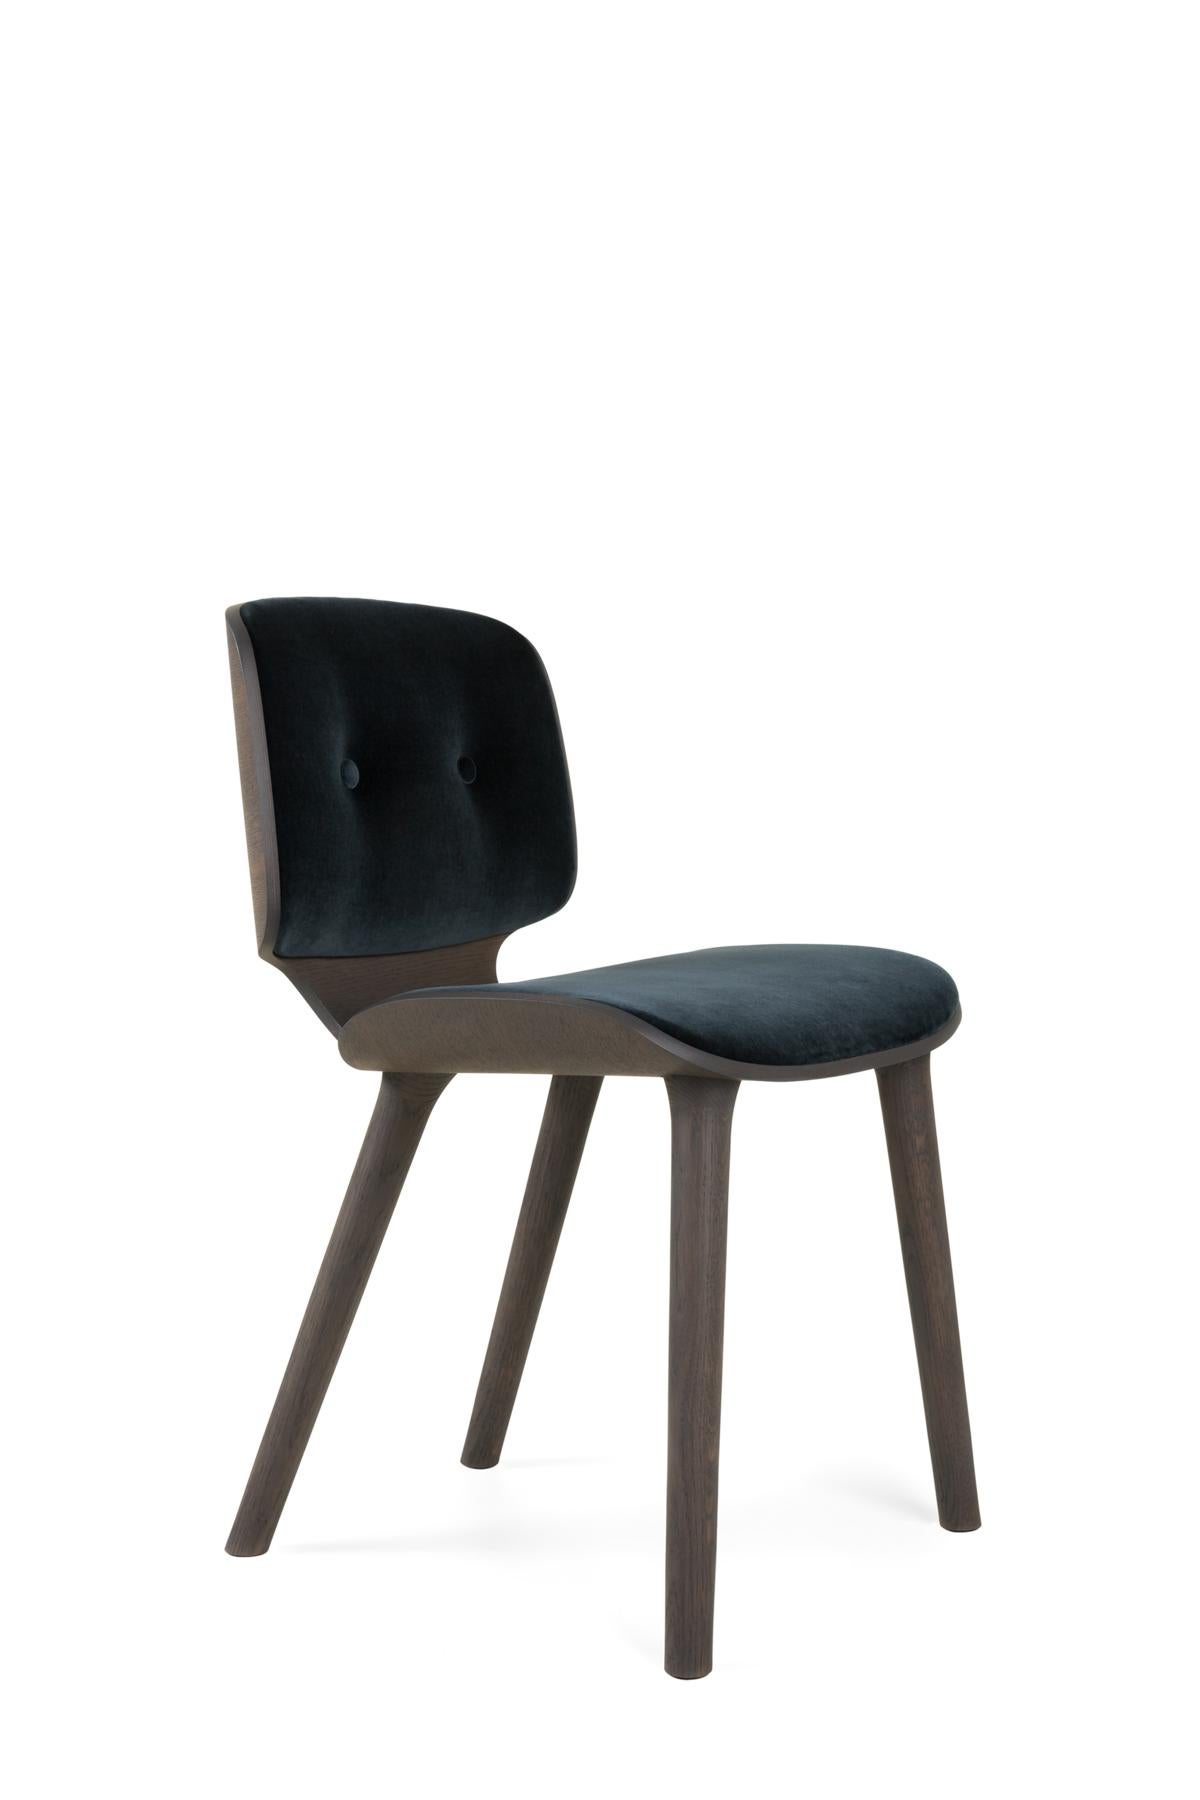 Modern Moooi Nut Dining Chair in Grey Stained Oak & Harald 3, 182 Blue Upholstery For Sale